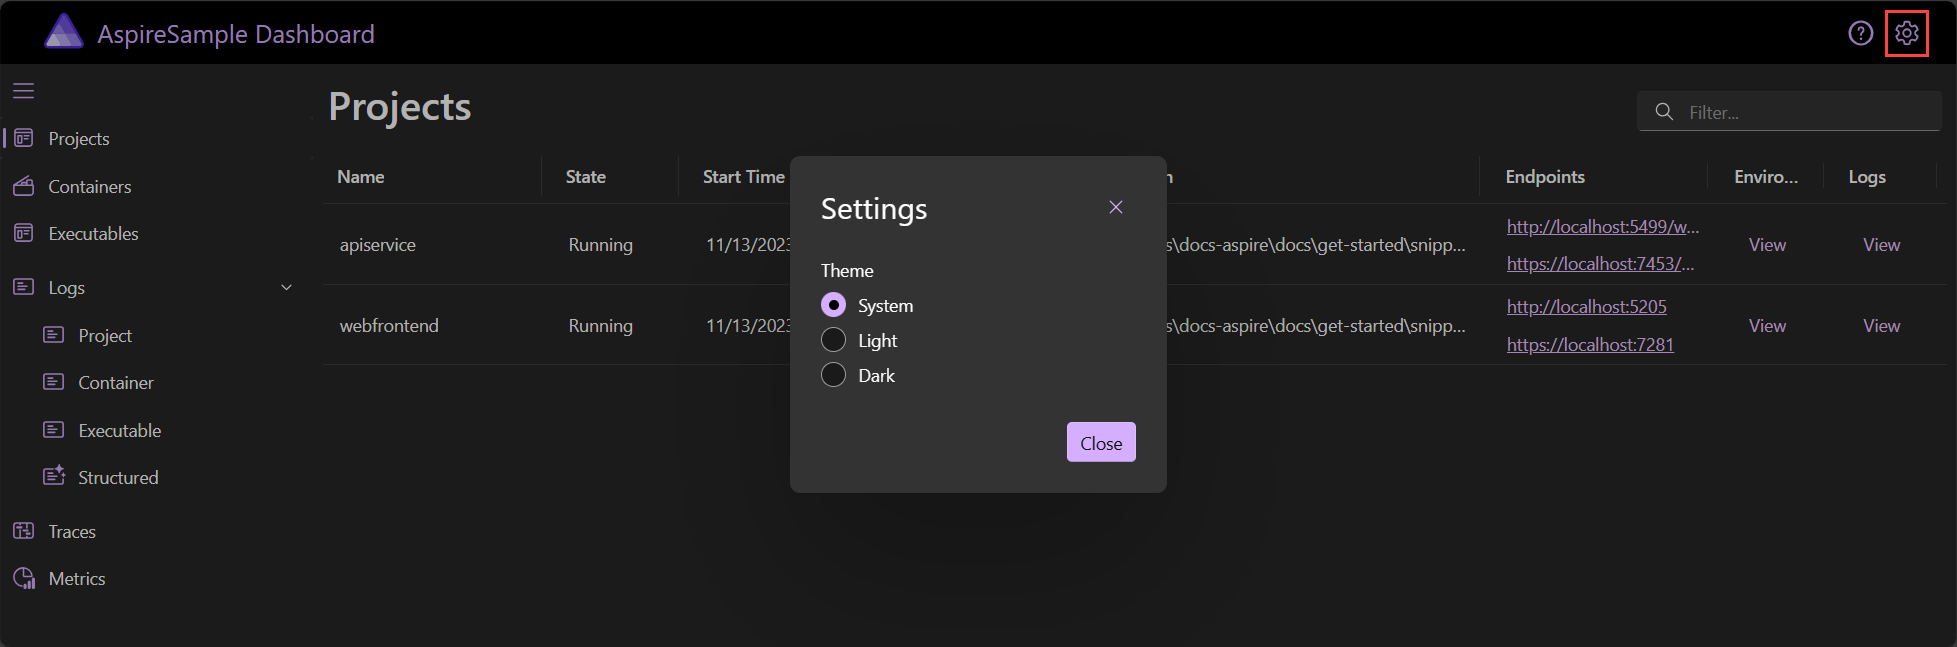 The .NET Aspire dashboard Settings dialog, showing the System theme default selection.